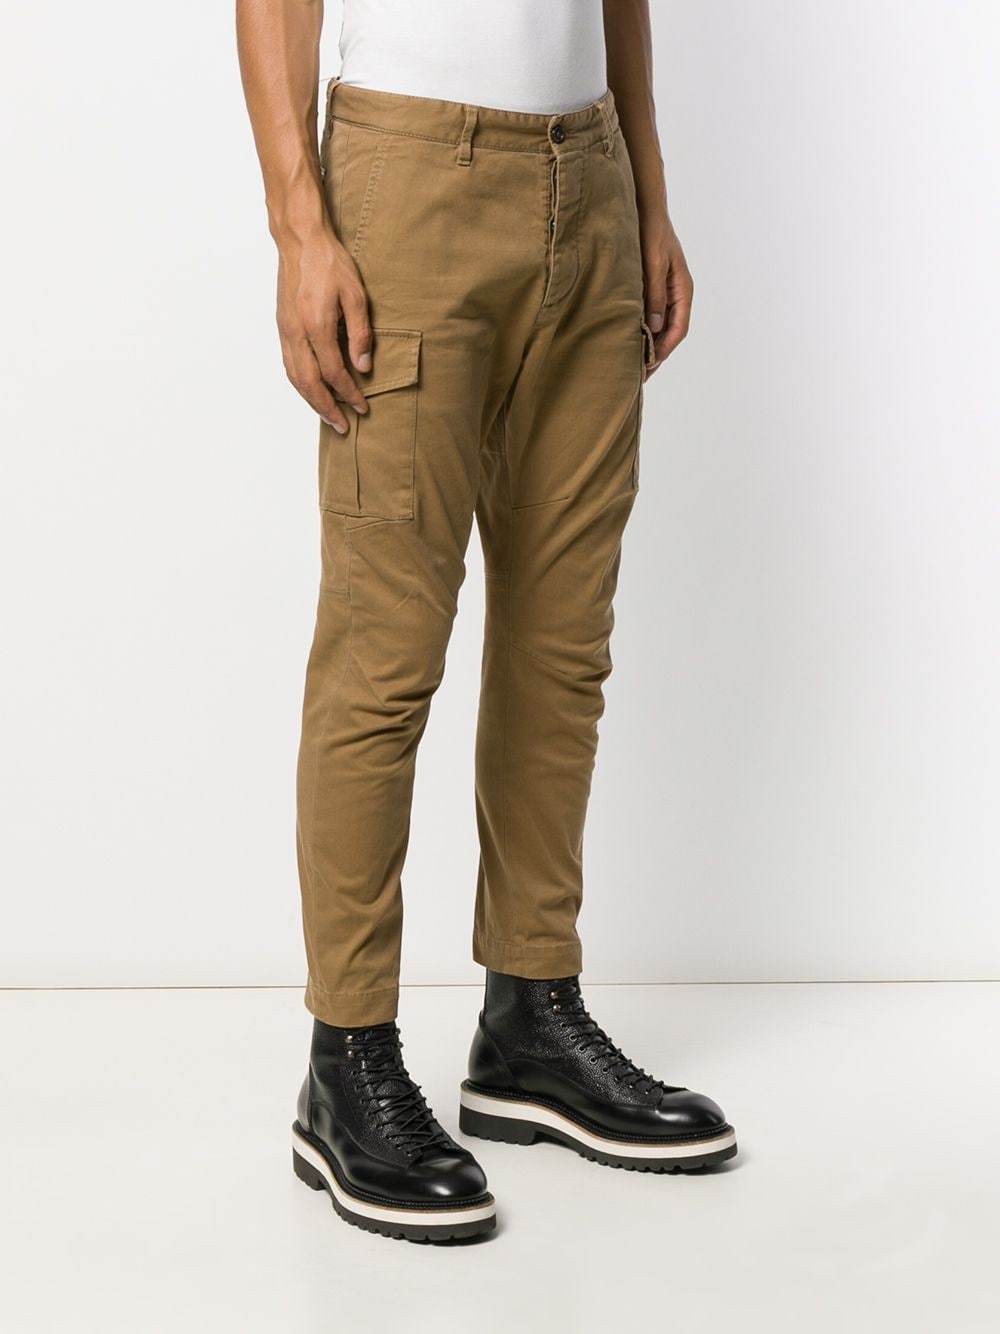 DSQUARED2 Tapered Leg Chinos, $338 | farfetch.com | Lookastic